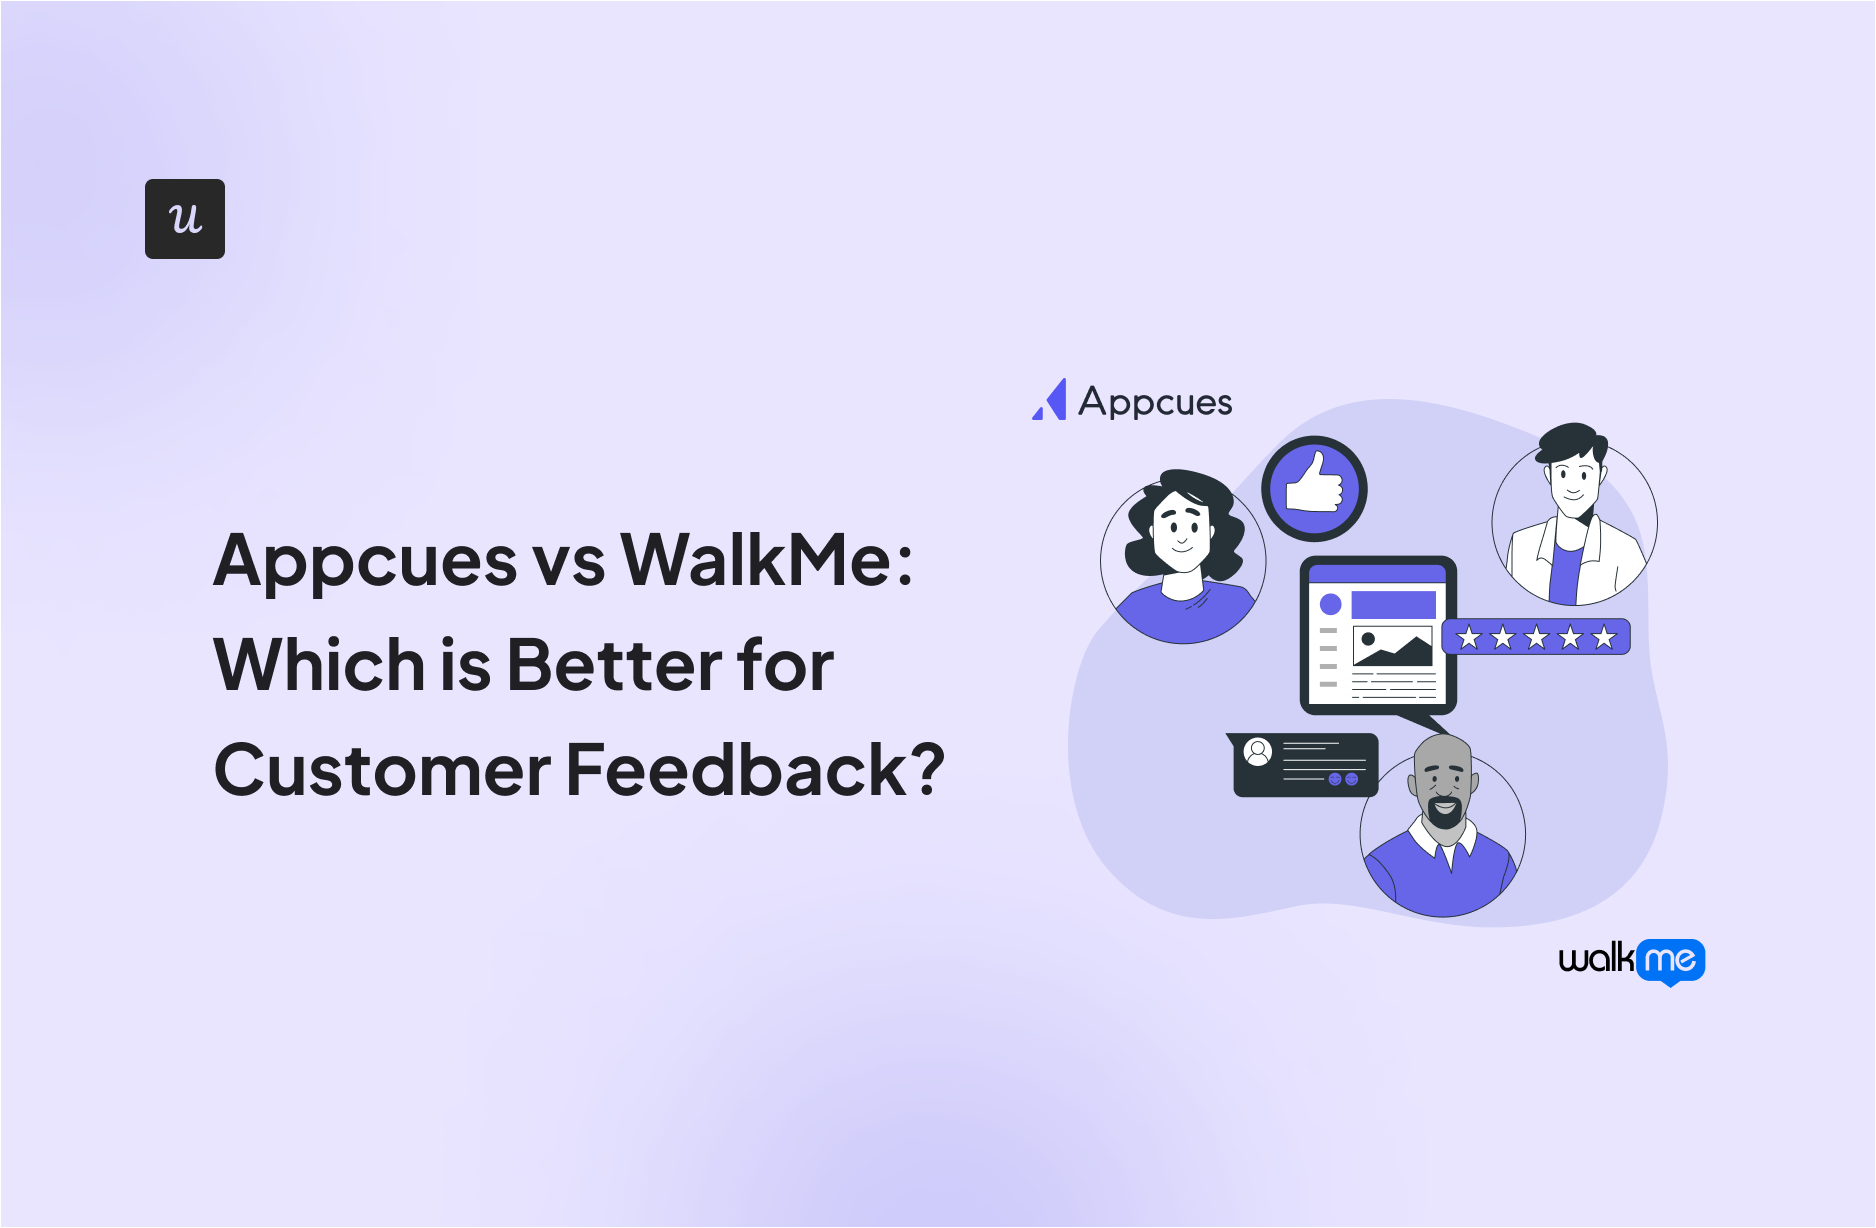 Appcues vs Walkme: Which is Better for Customer Feedback?